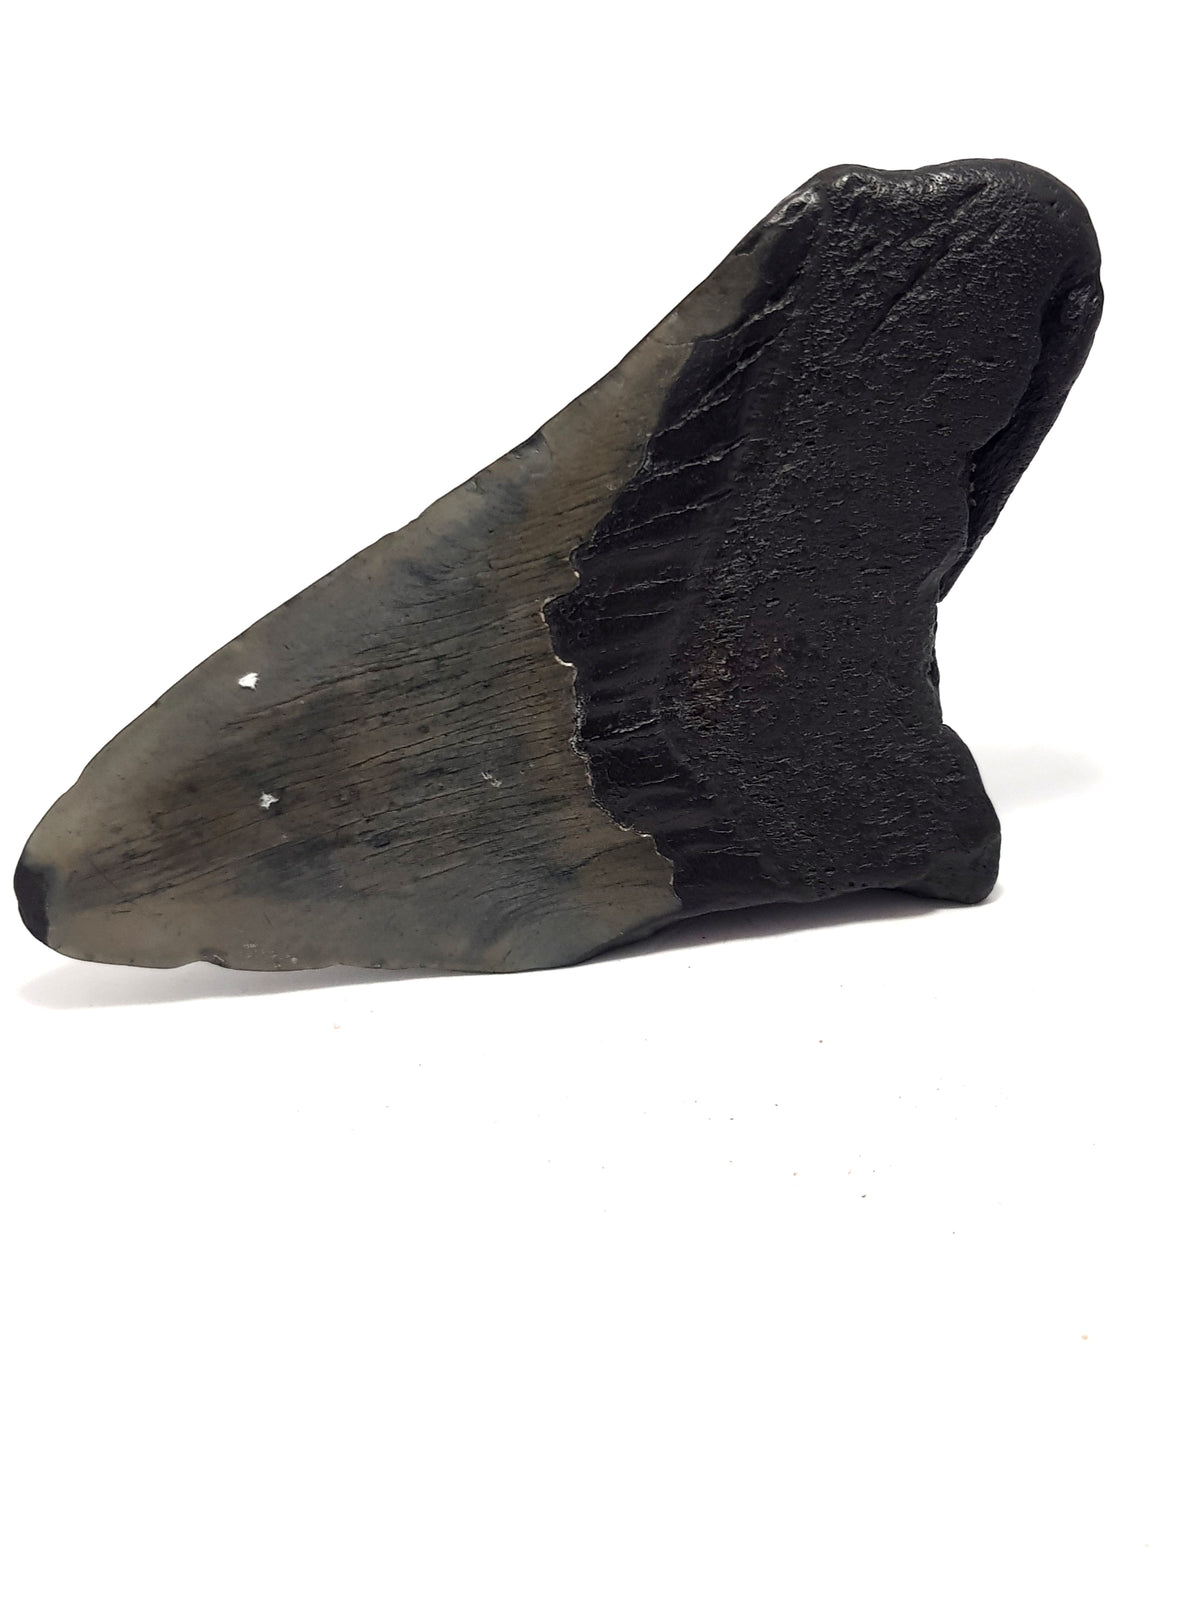 rear view of a megalodon tooth. The enamel is grey.